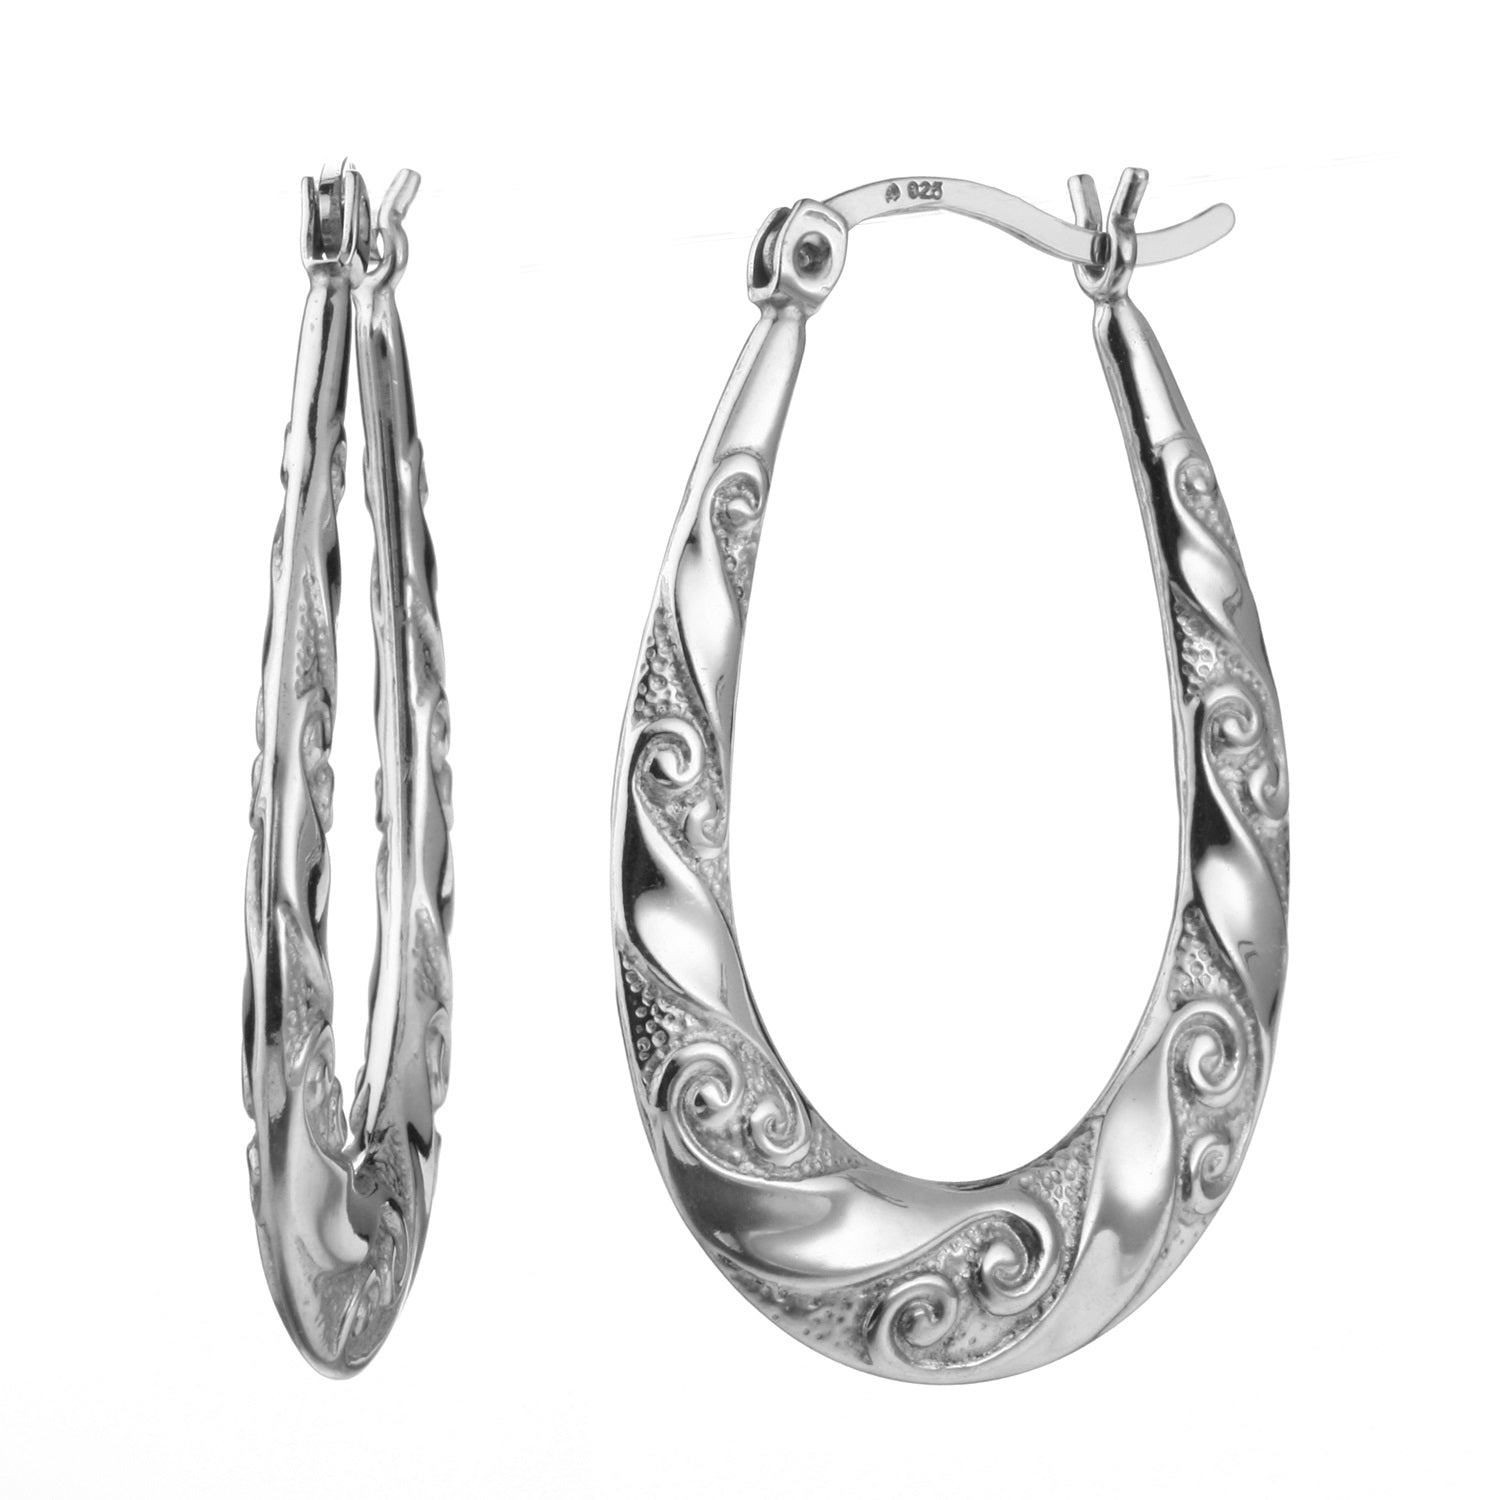 925 STERLING SILVER 30.0 MM. BACK TO BACK SPIRAL ON HOOP CREOLE EARRINGS F17286